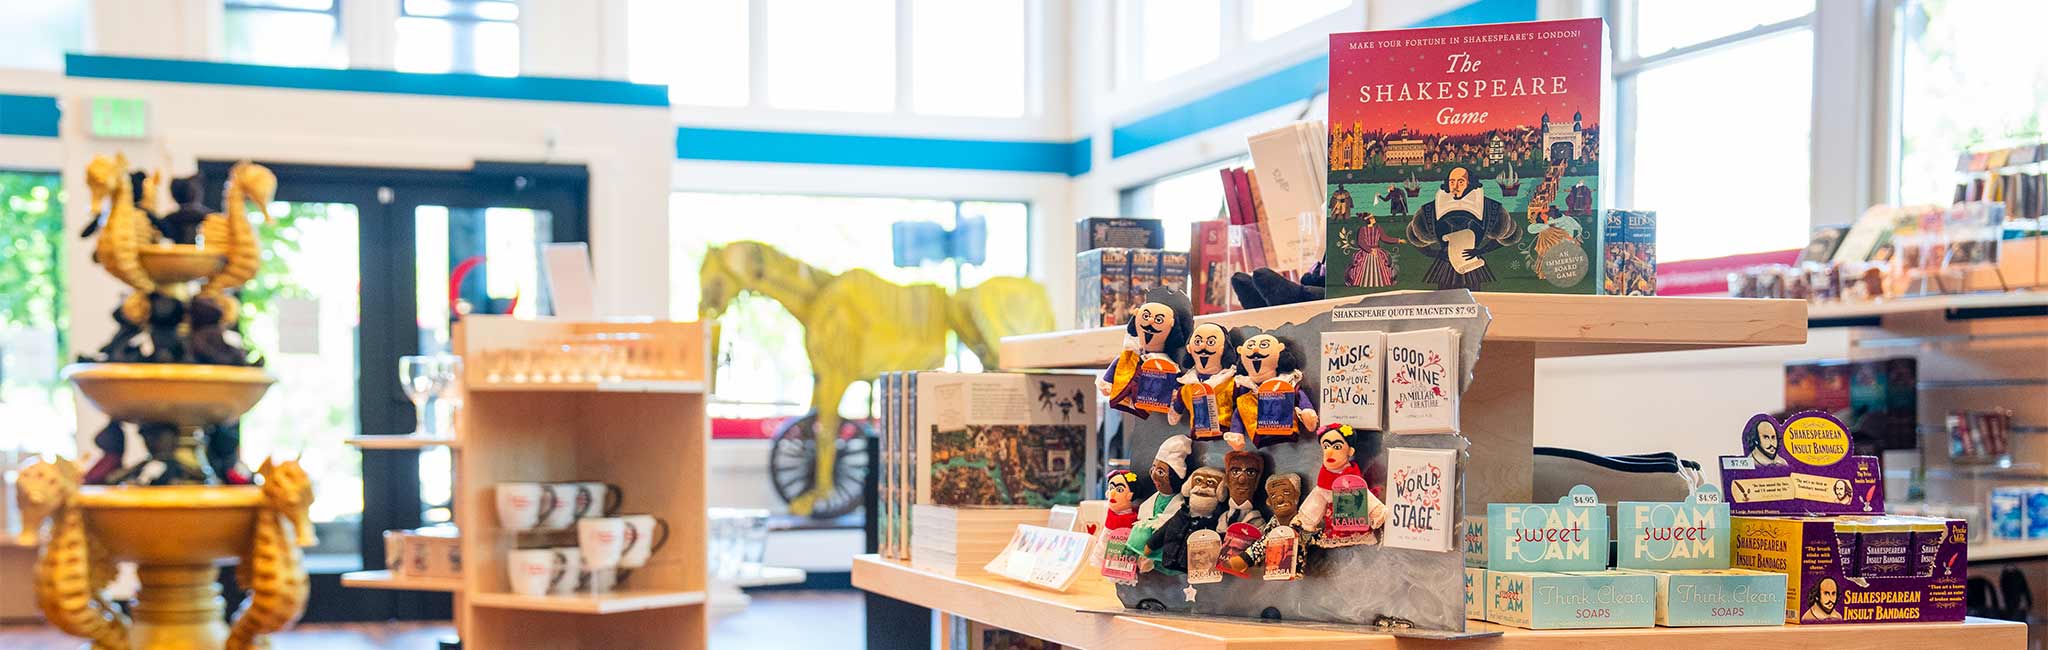 Inside of the new gift shop, showing books, toys and a large prop horse in the background.